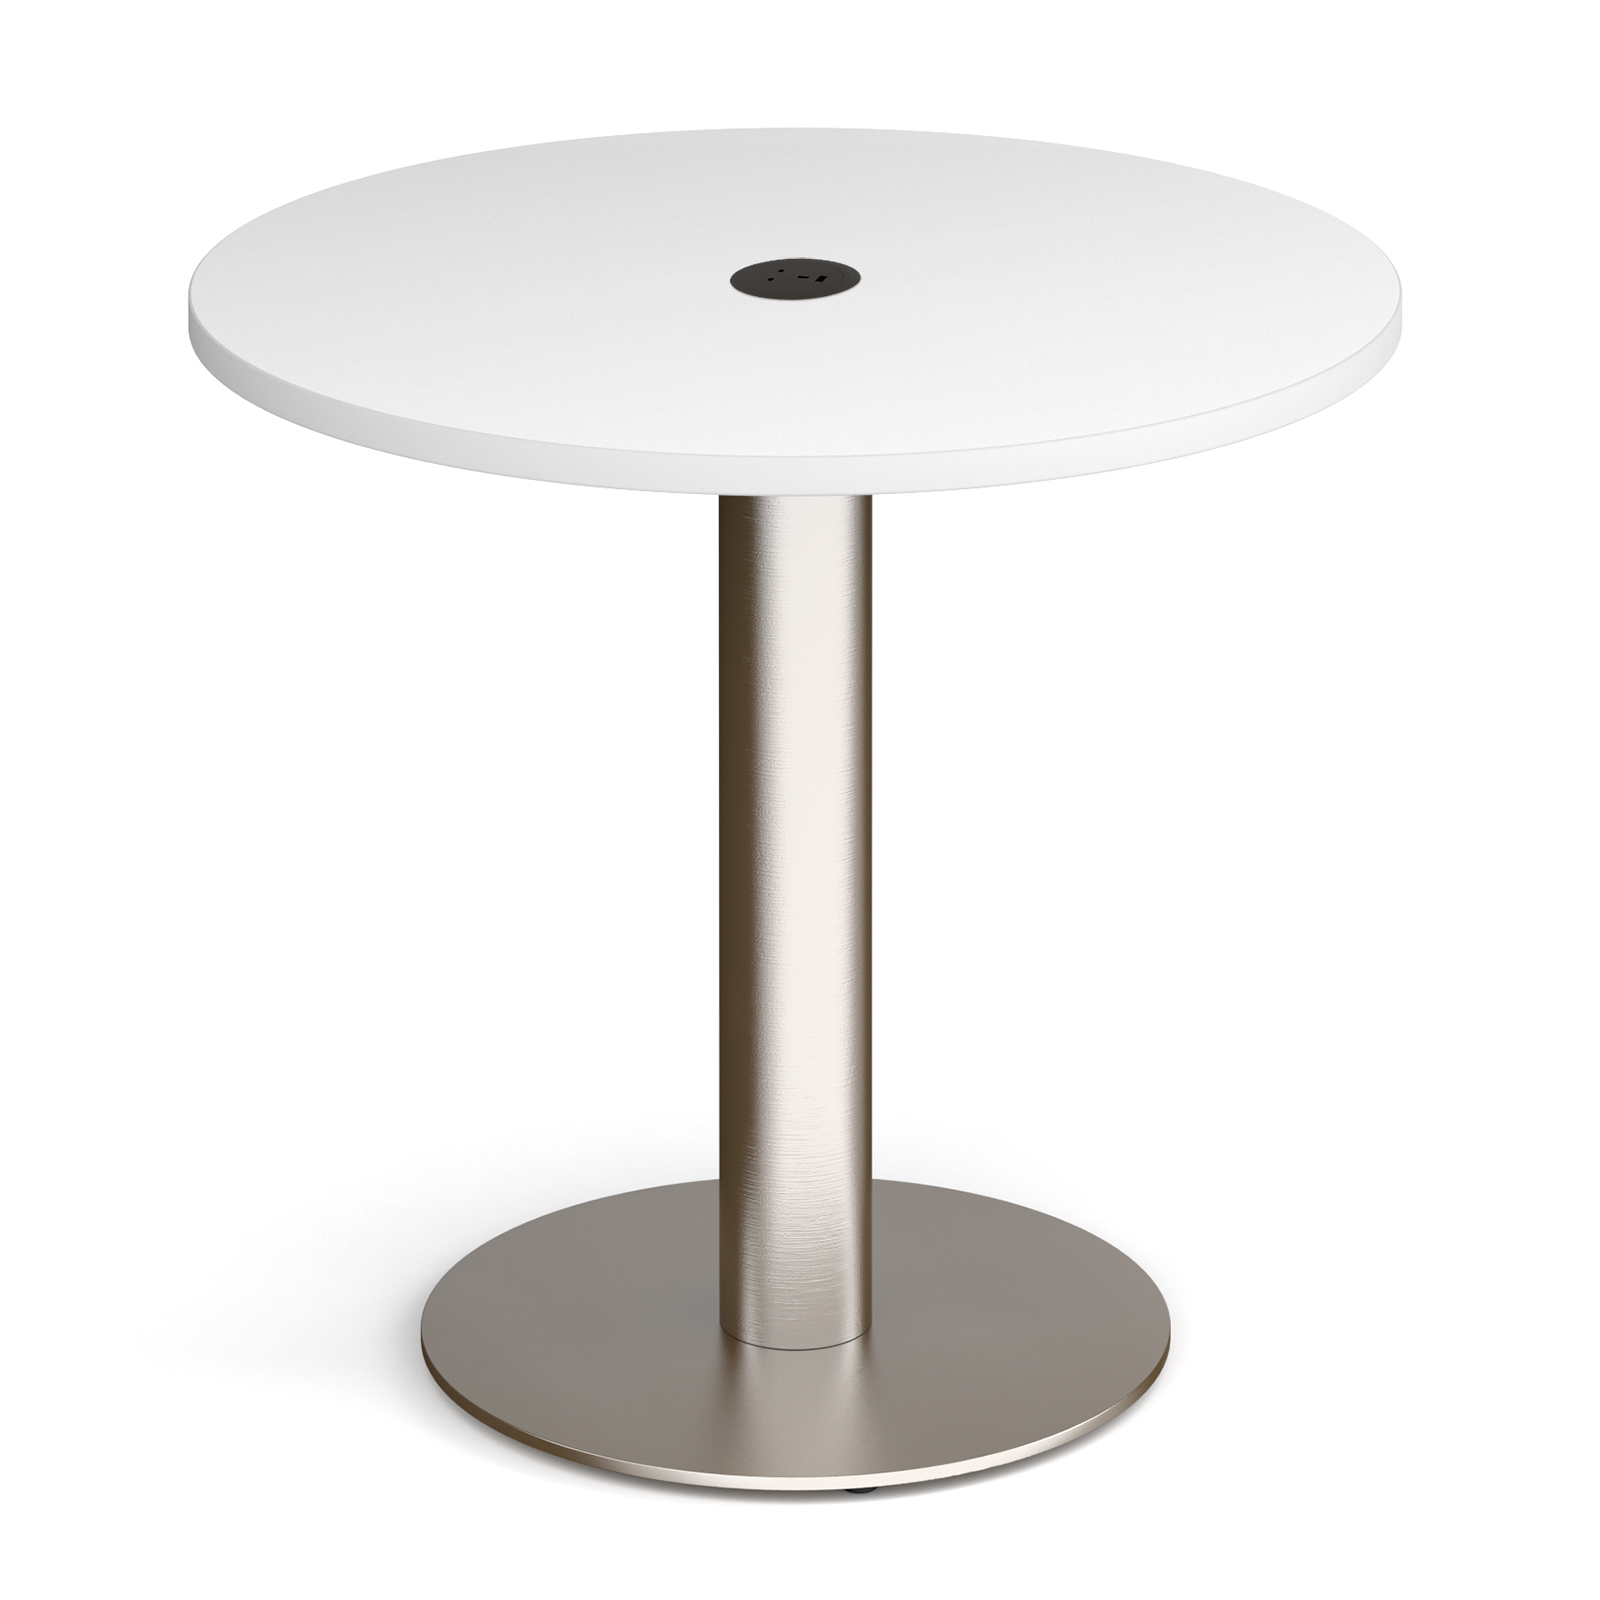 Boardroom / Meeting Monza circular dining table 800mm in white with central circular cutout and Ion power module in black